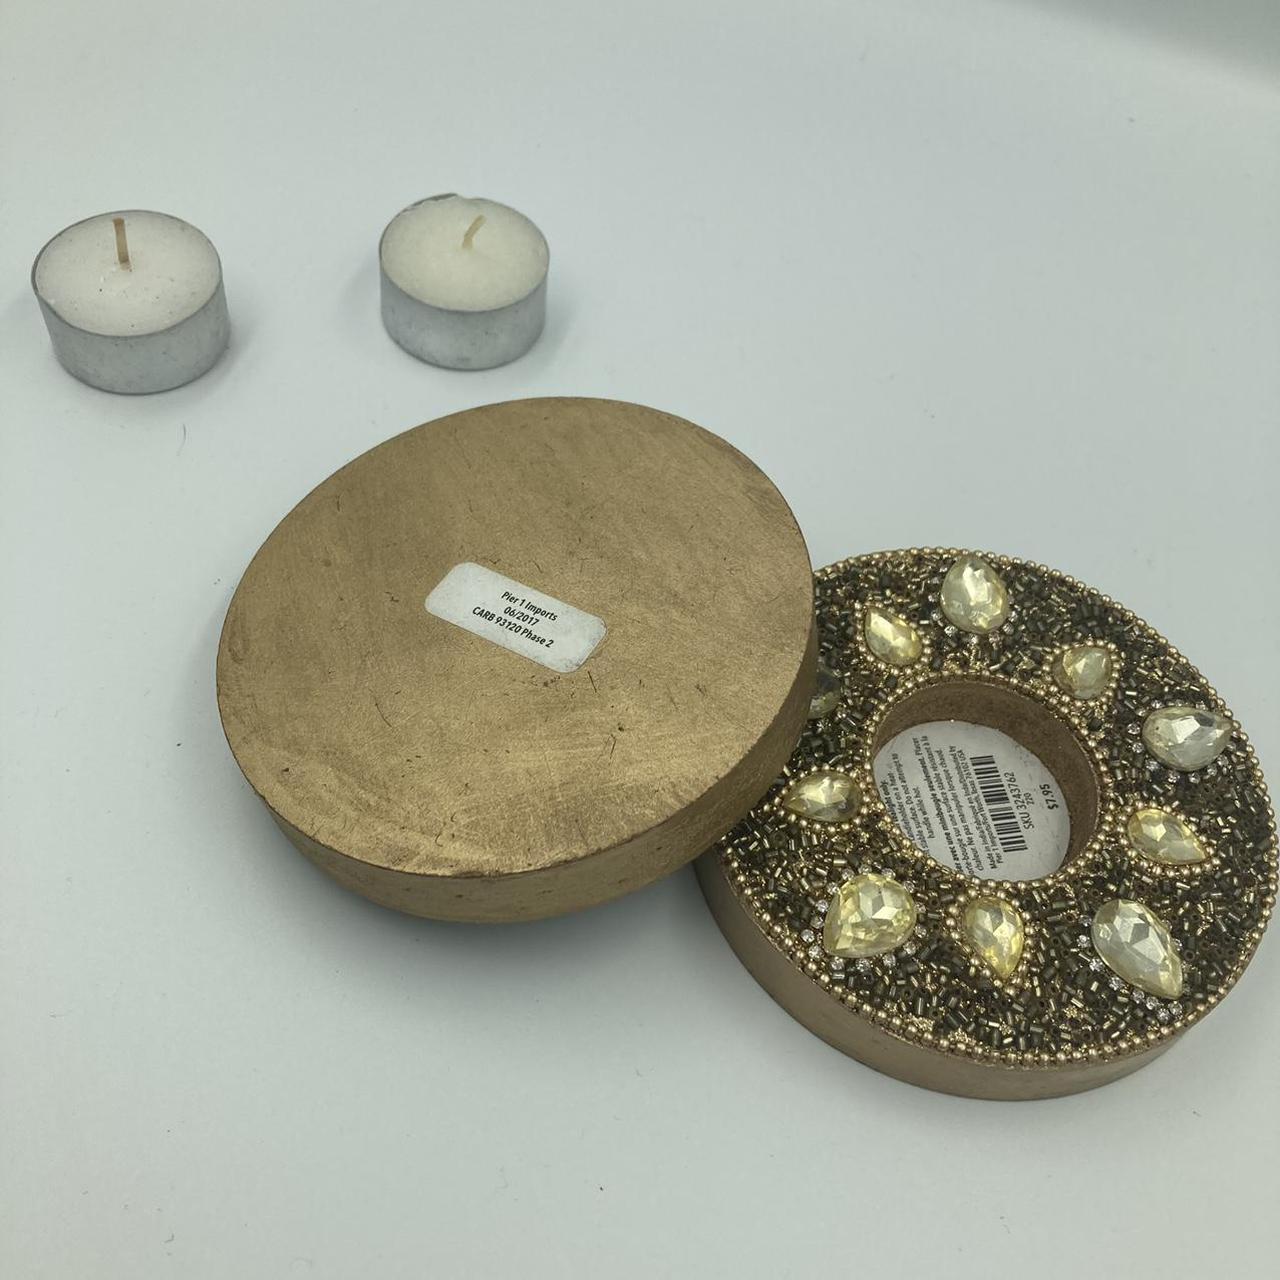 Product Image 2 - #Pier1 tea #candle holders set